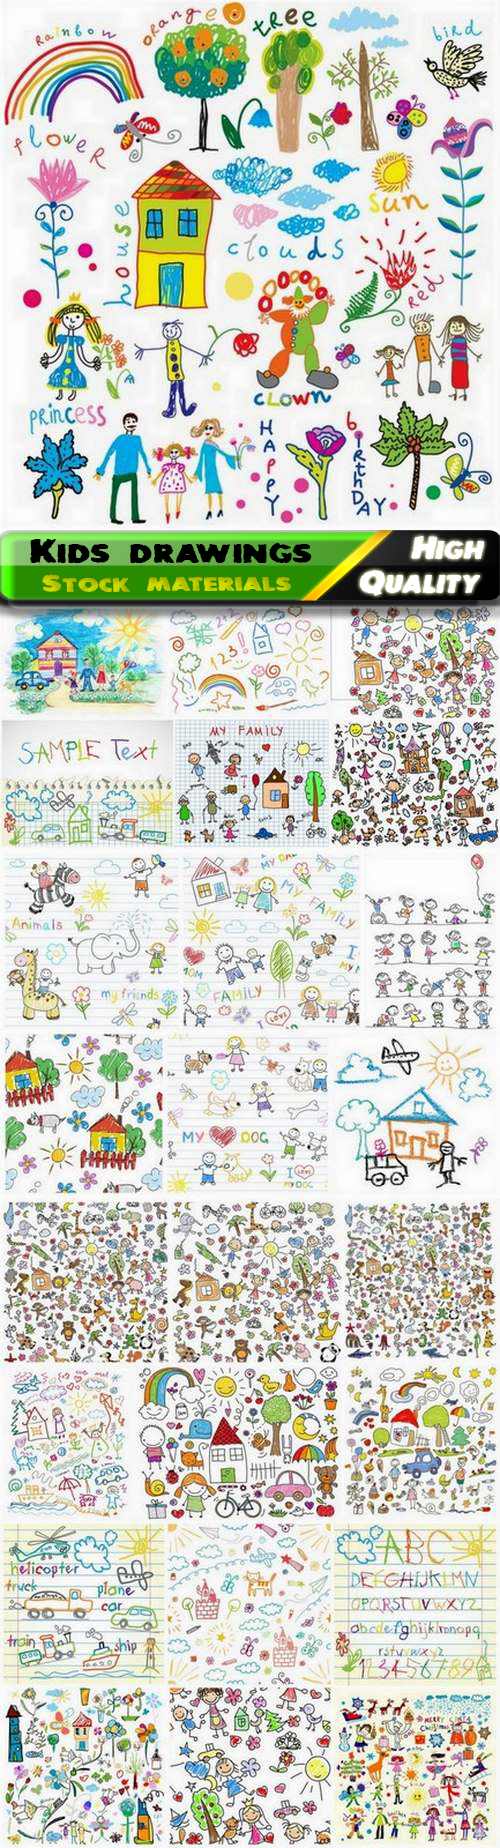 Creative art children and kids pencil and chalk drawings - 25 Eps